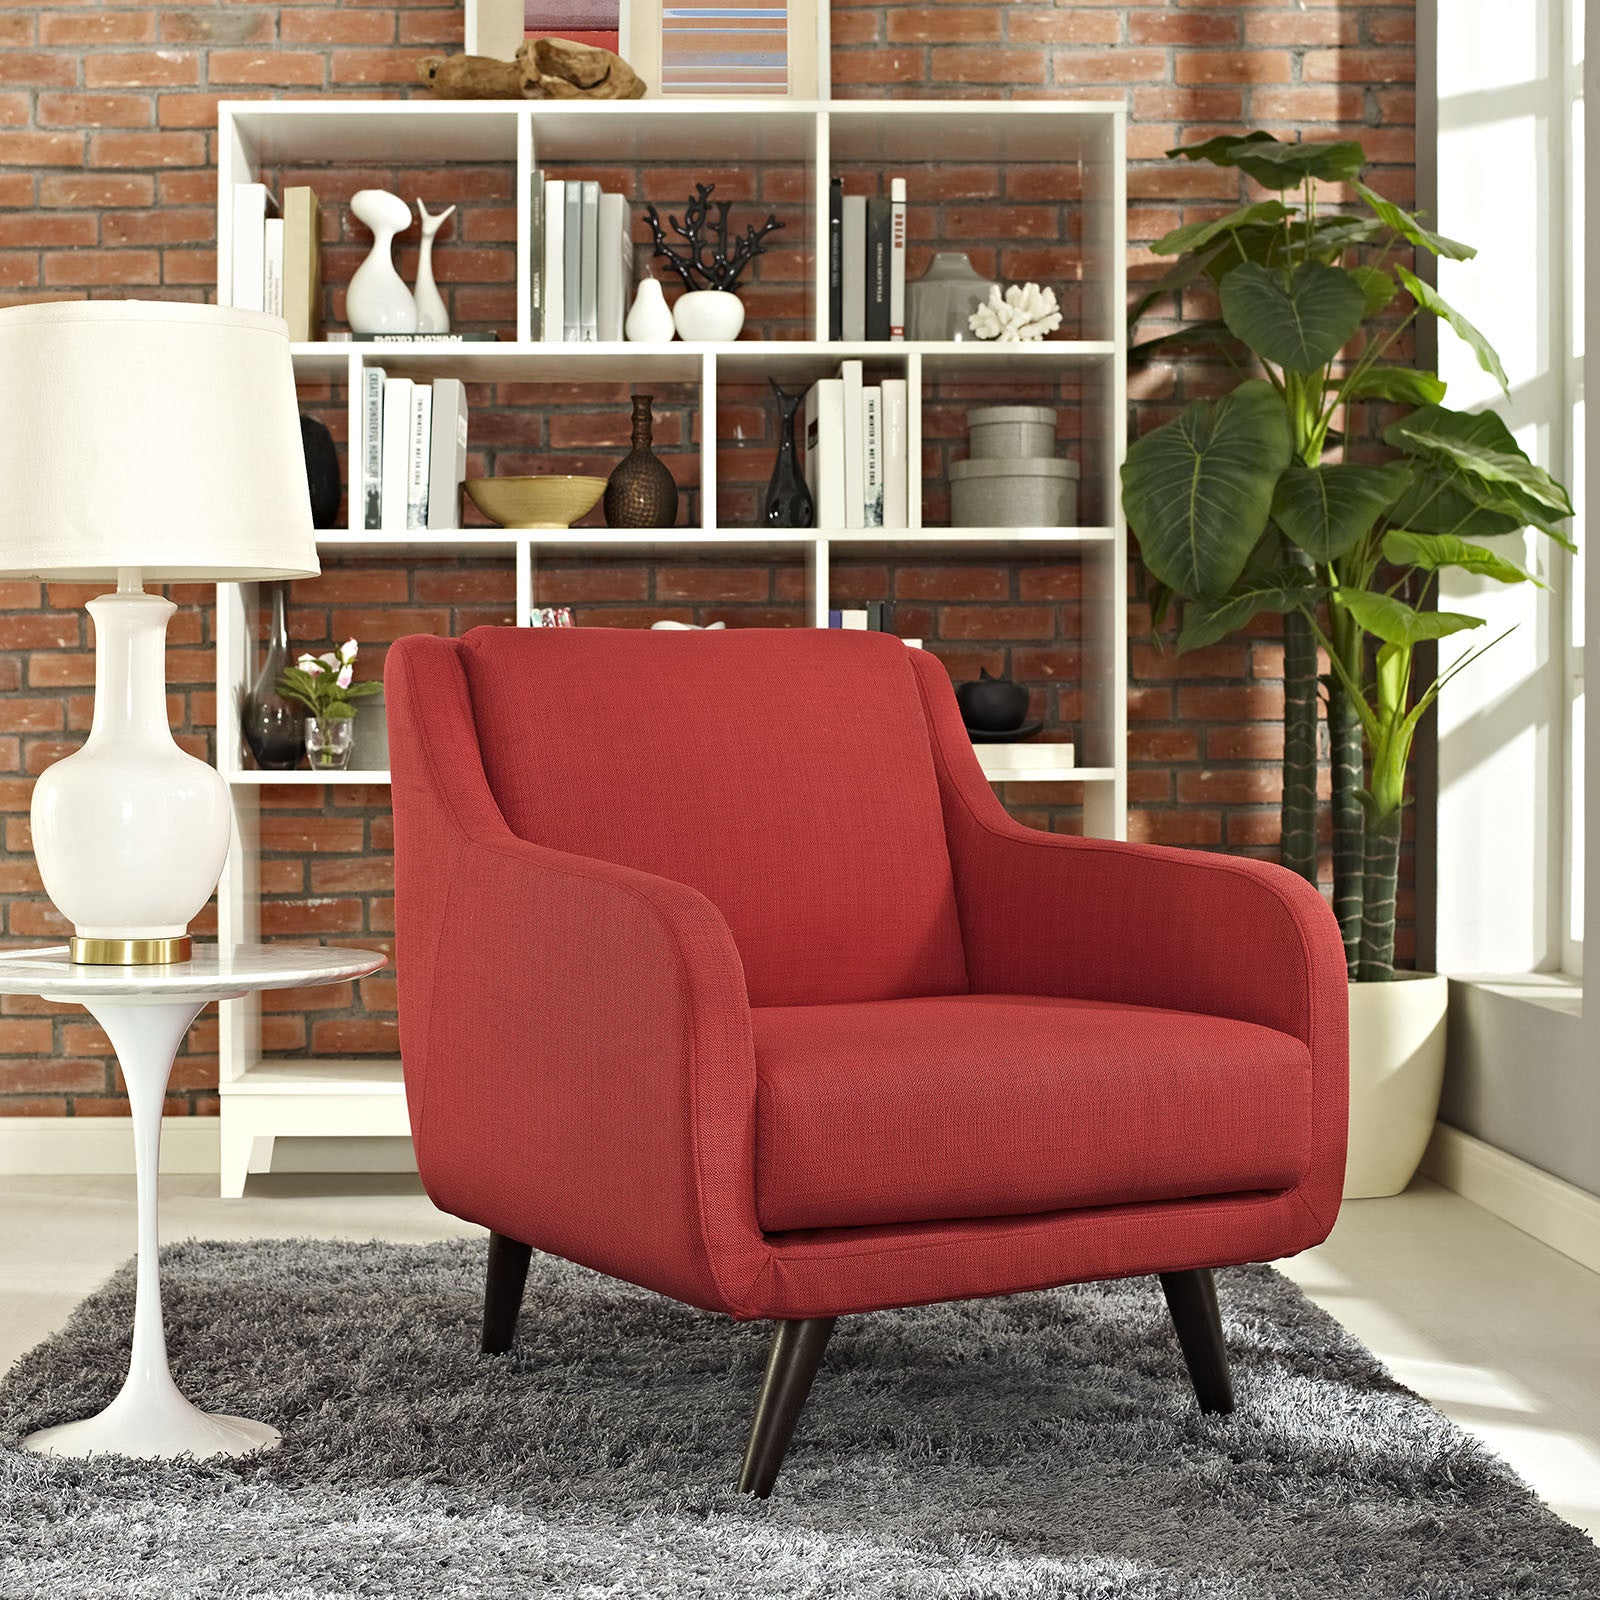 Virtue Armchair Atomic Red